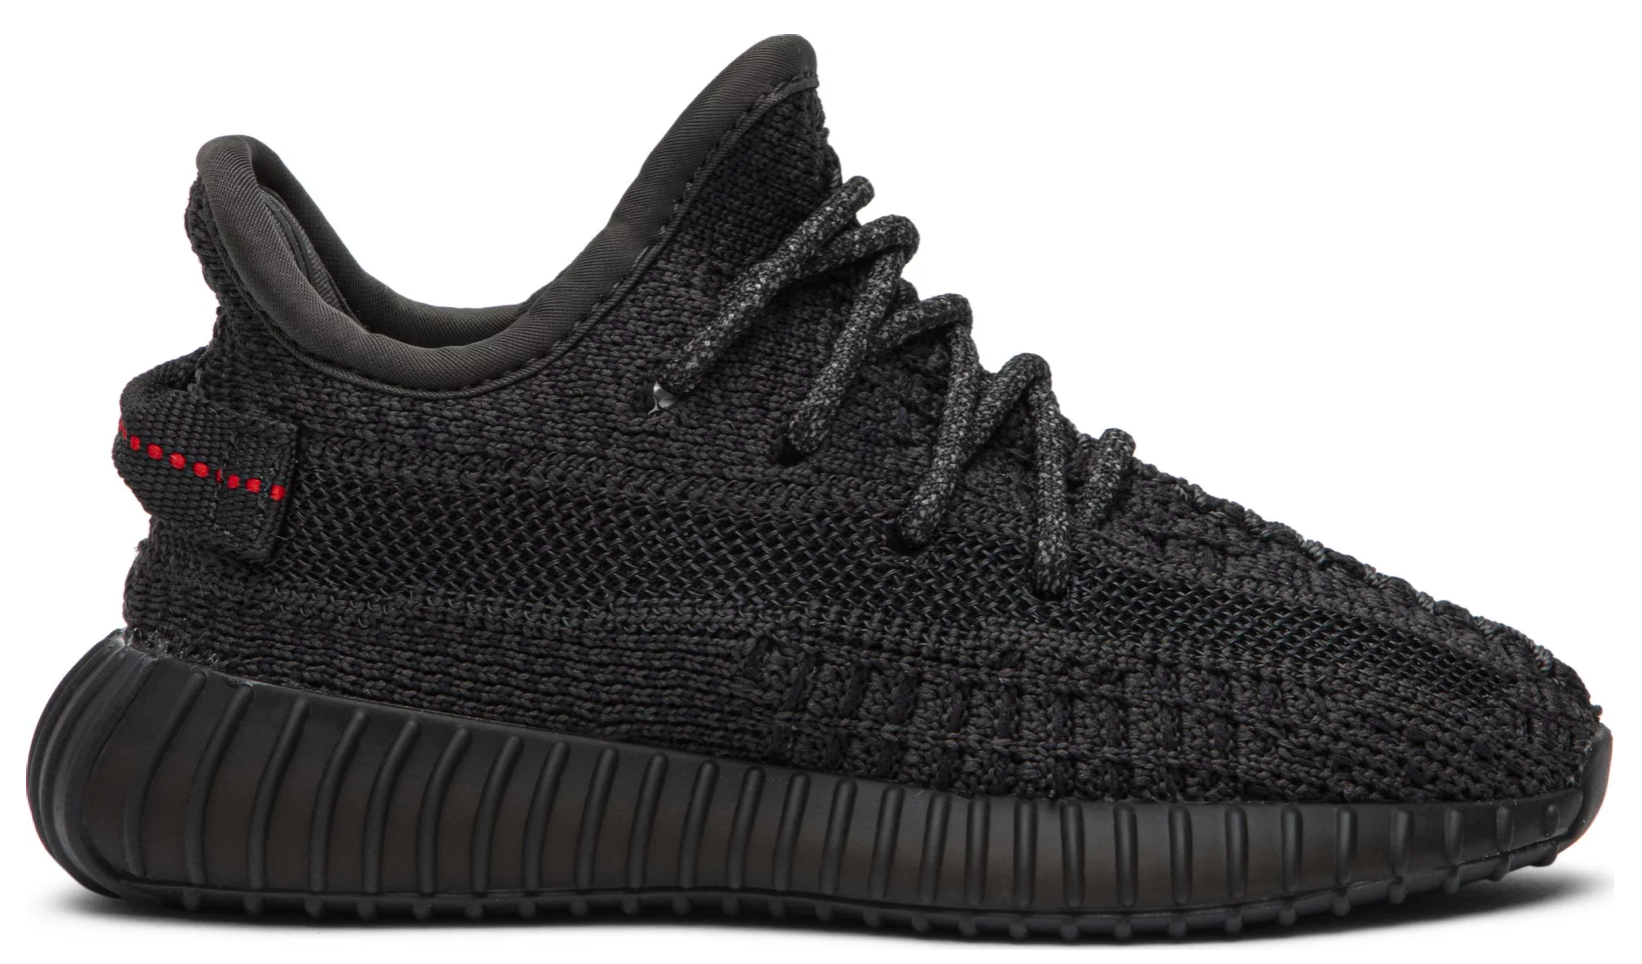 REFLECTIVE) - YEEZY BOOST 350 V2 BLACK (INFANT)(NON - This adidas